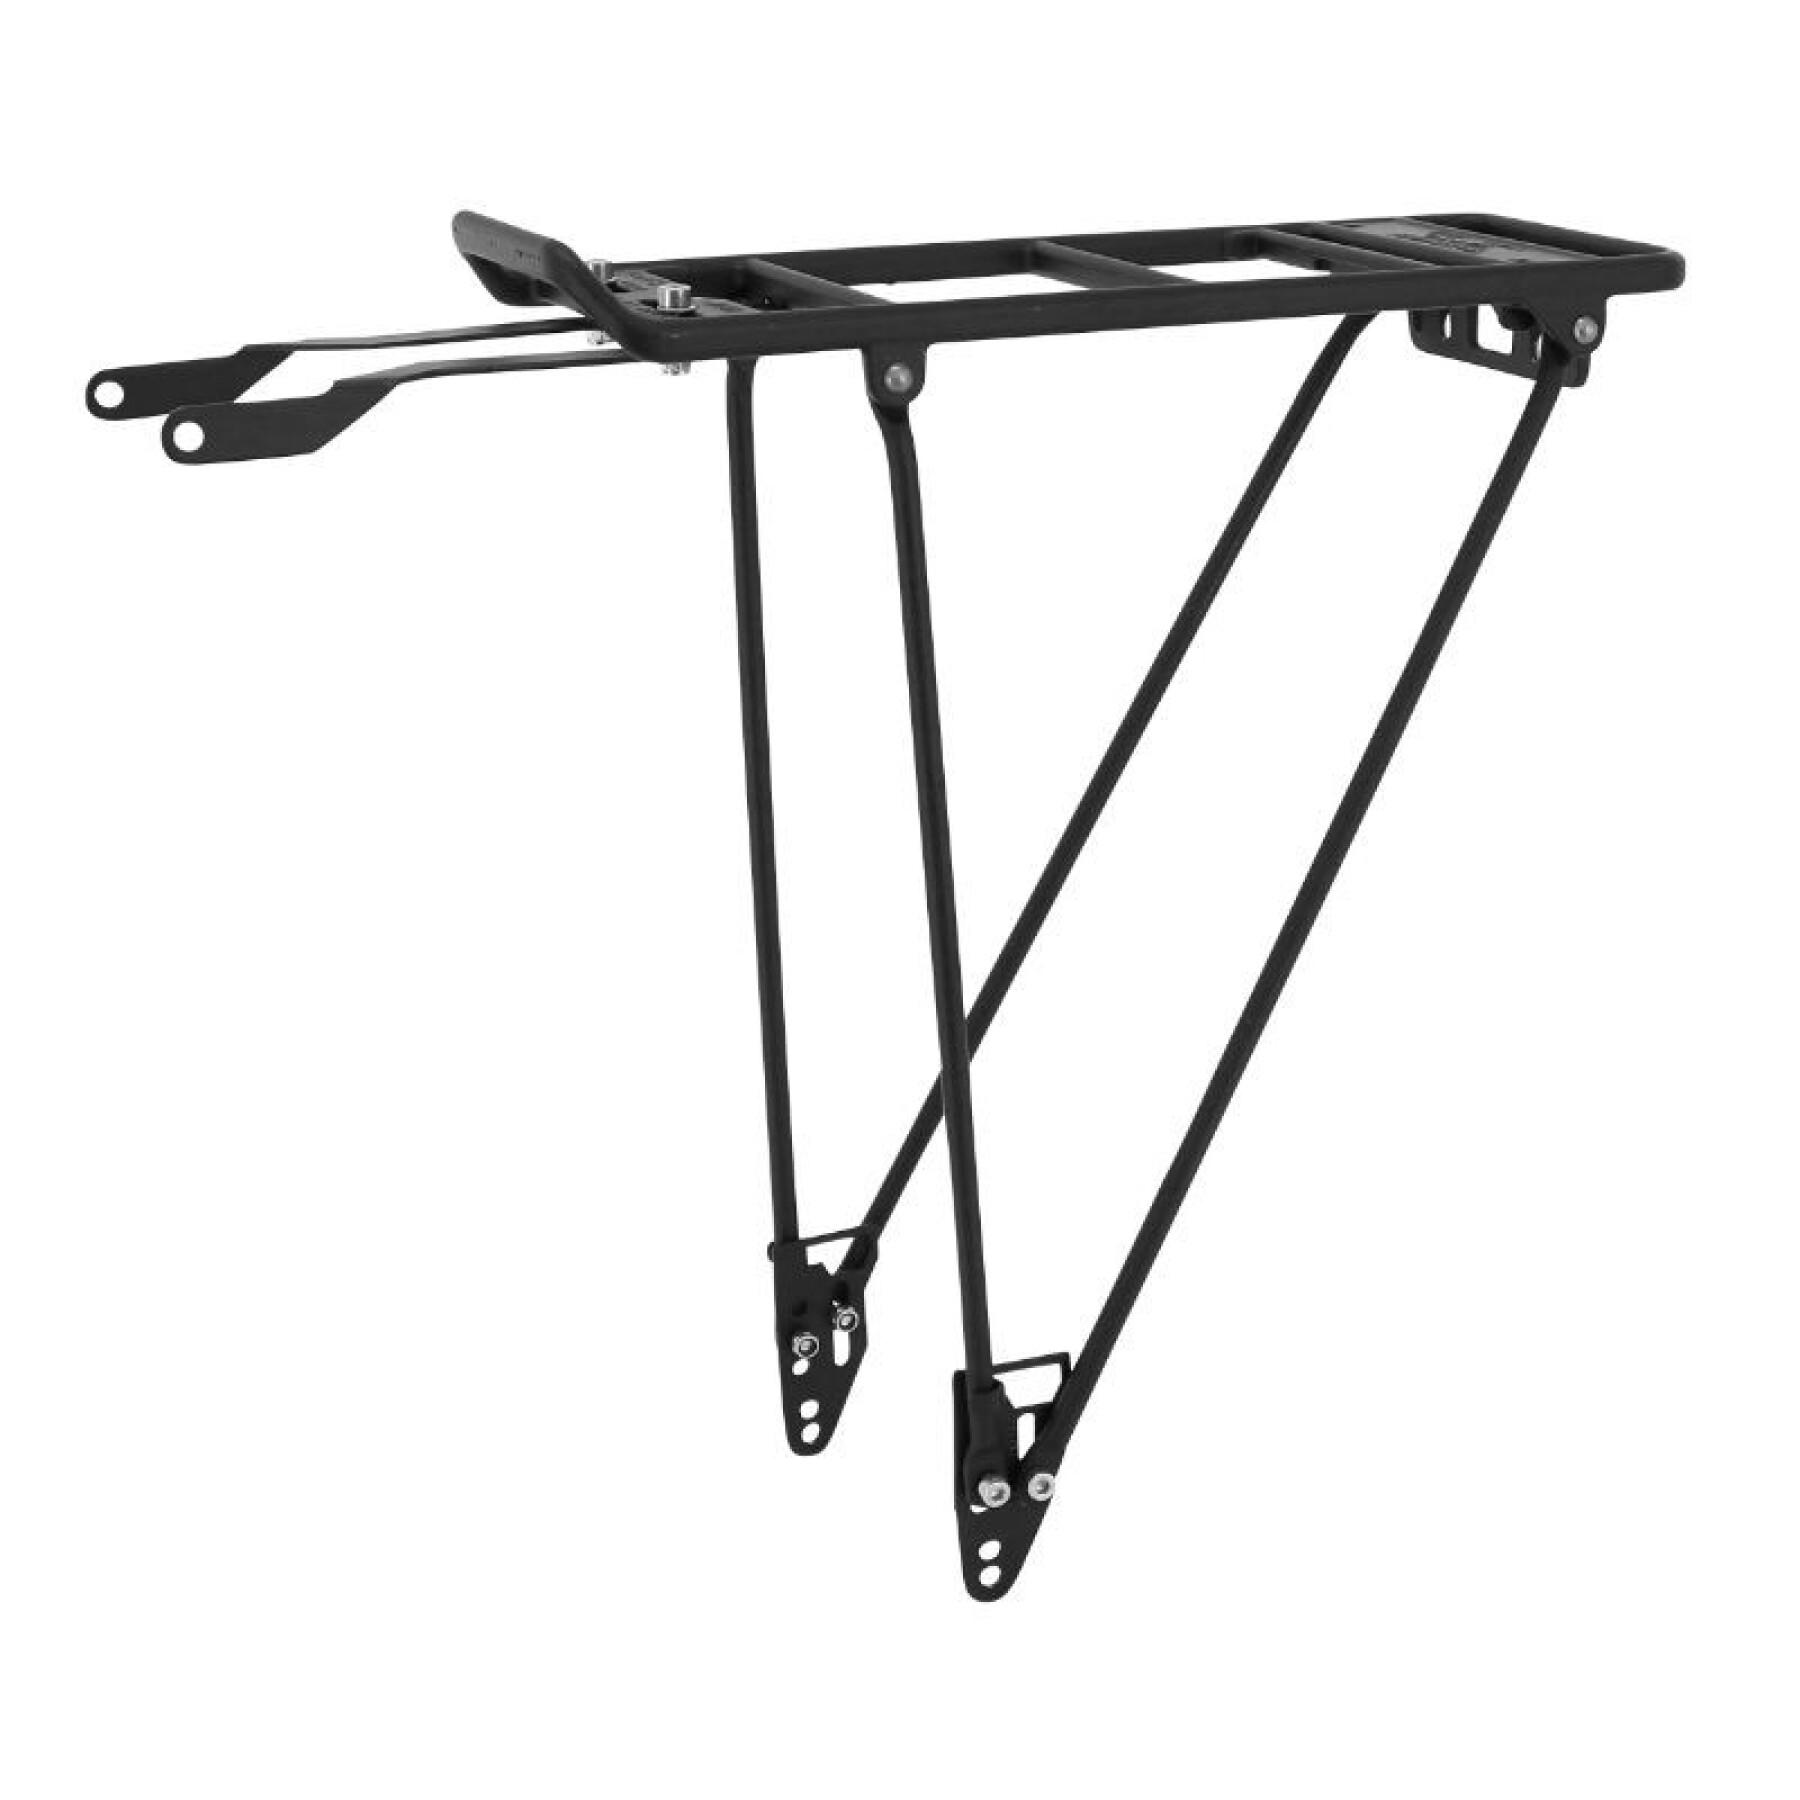 Rear bike carrier with aluminium rods compatible with mik system basil Pletscher Werso 27 kgs